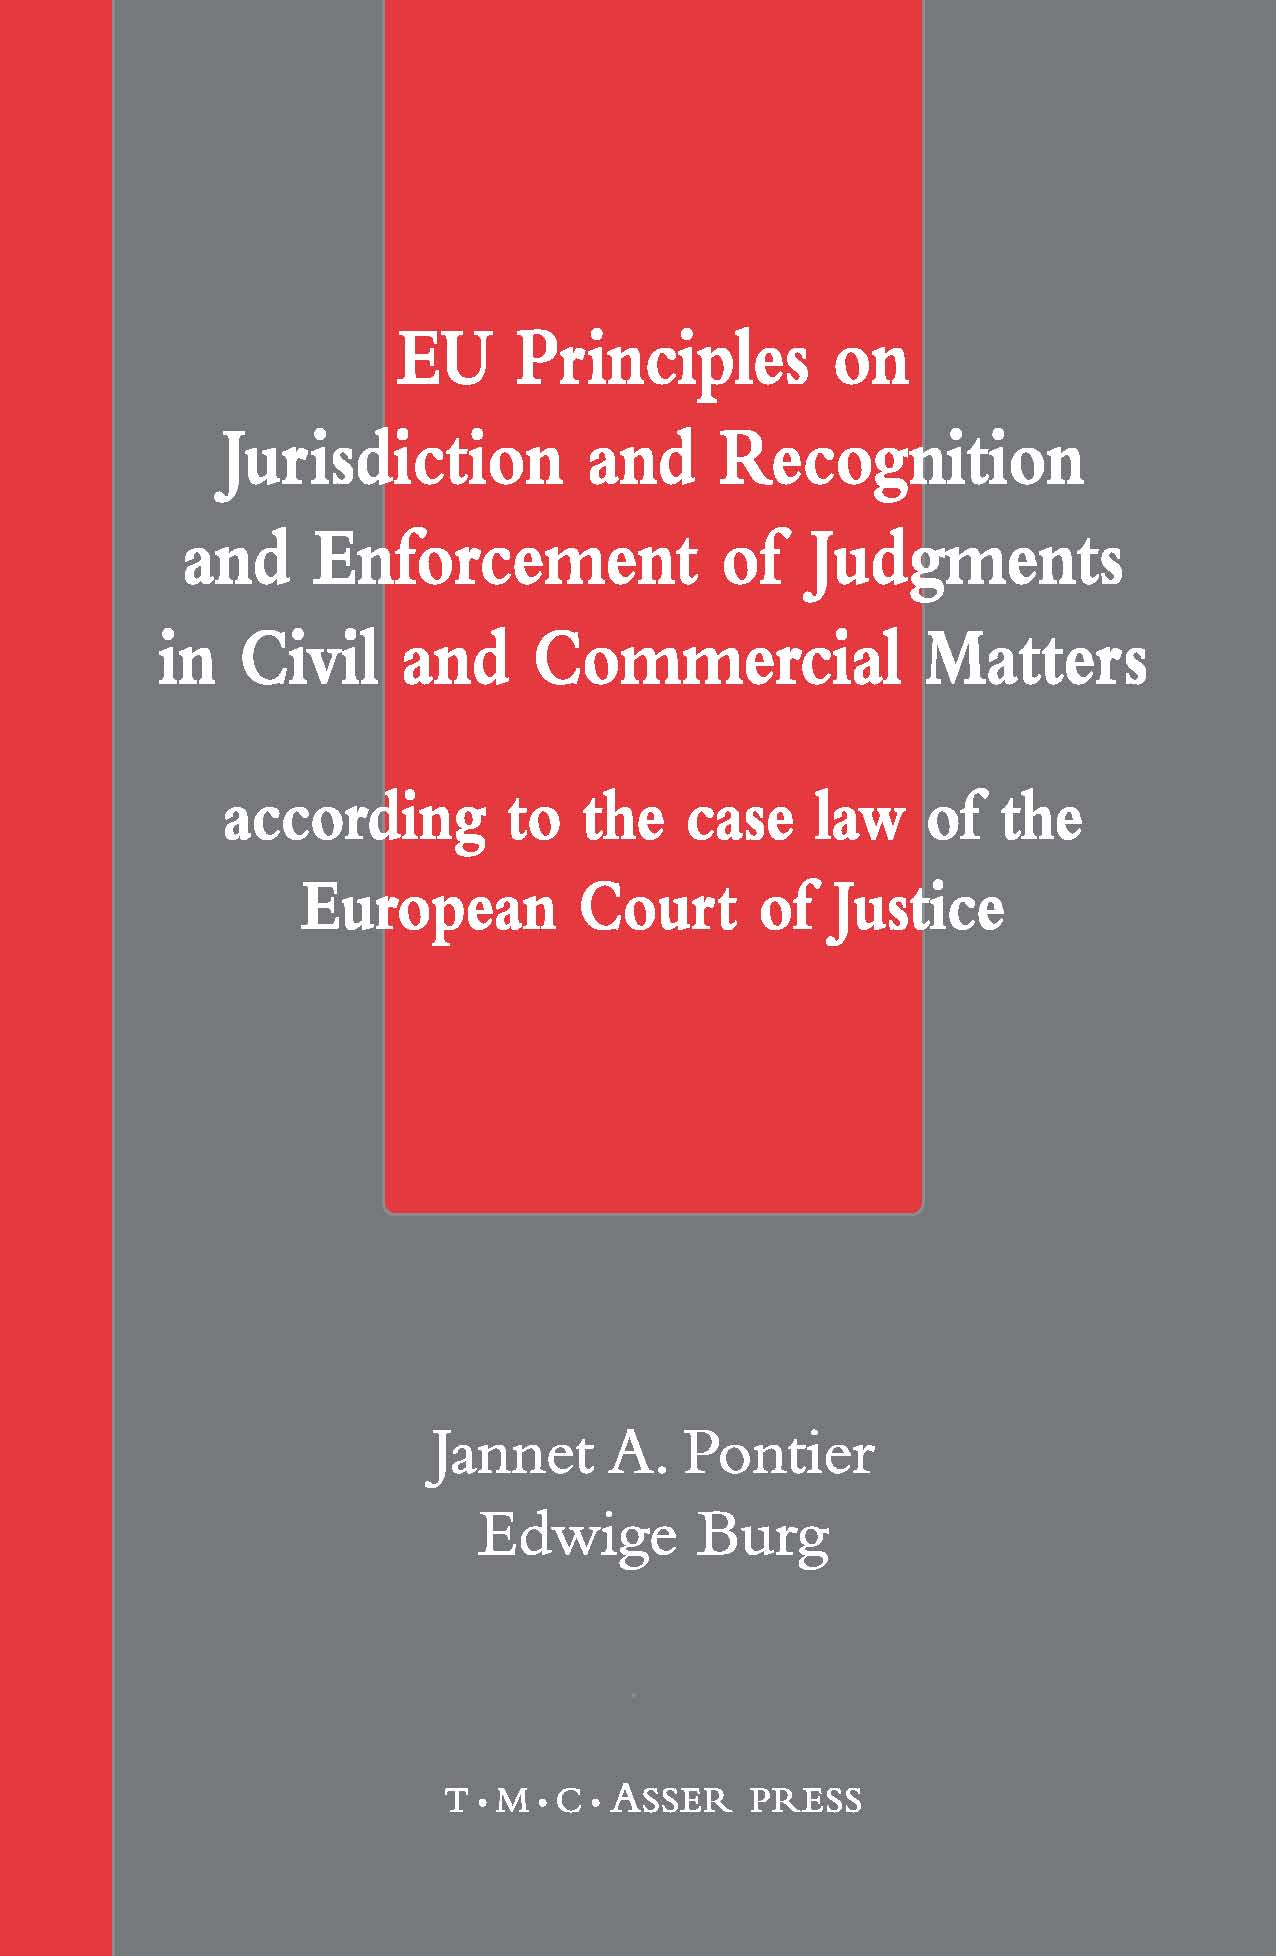 EU Principles on Jurisdiction and Recognition and Enforcement of Judgments in Civil and Commercial Matters according to the case law of the European Court of Justice